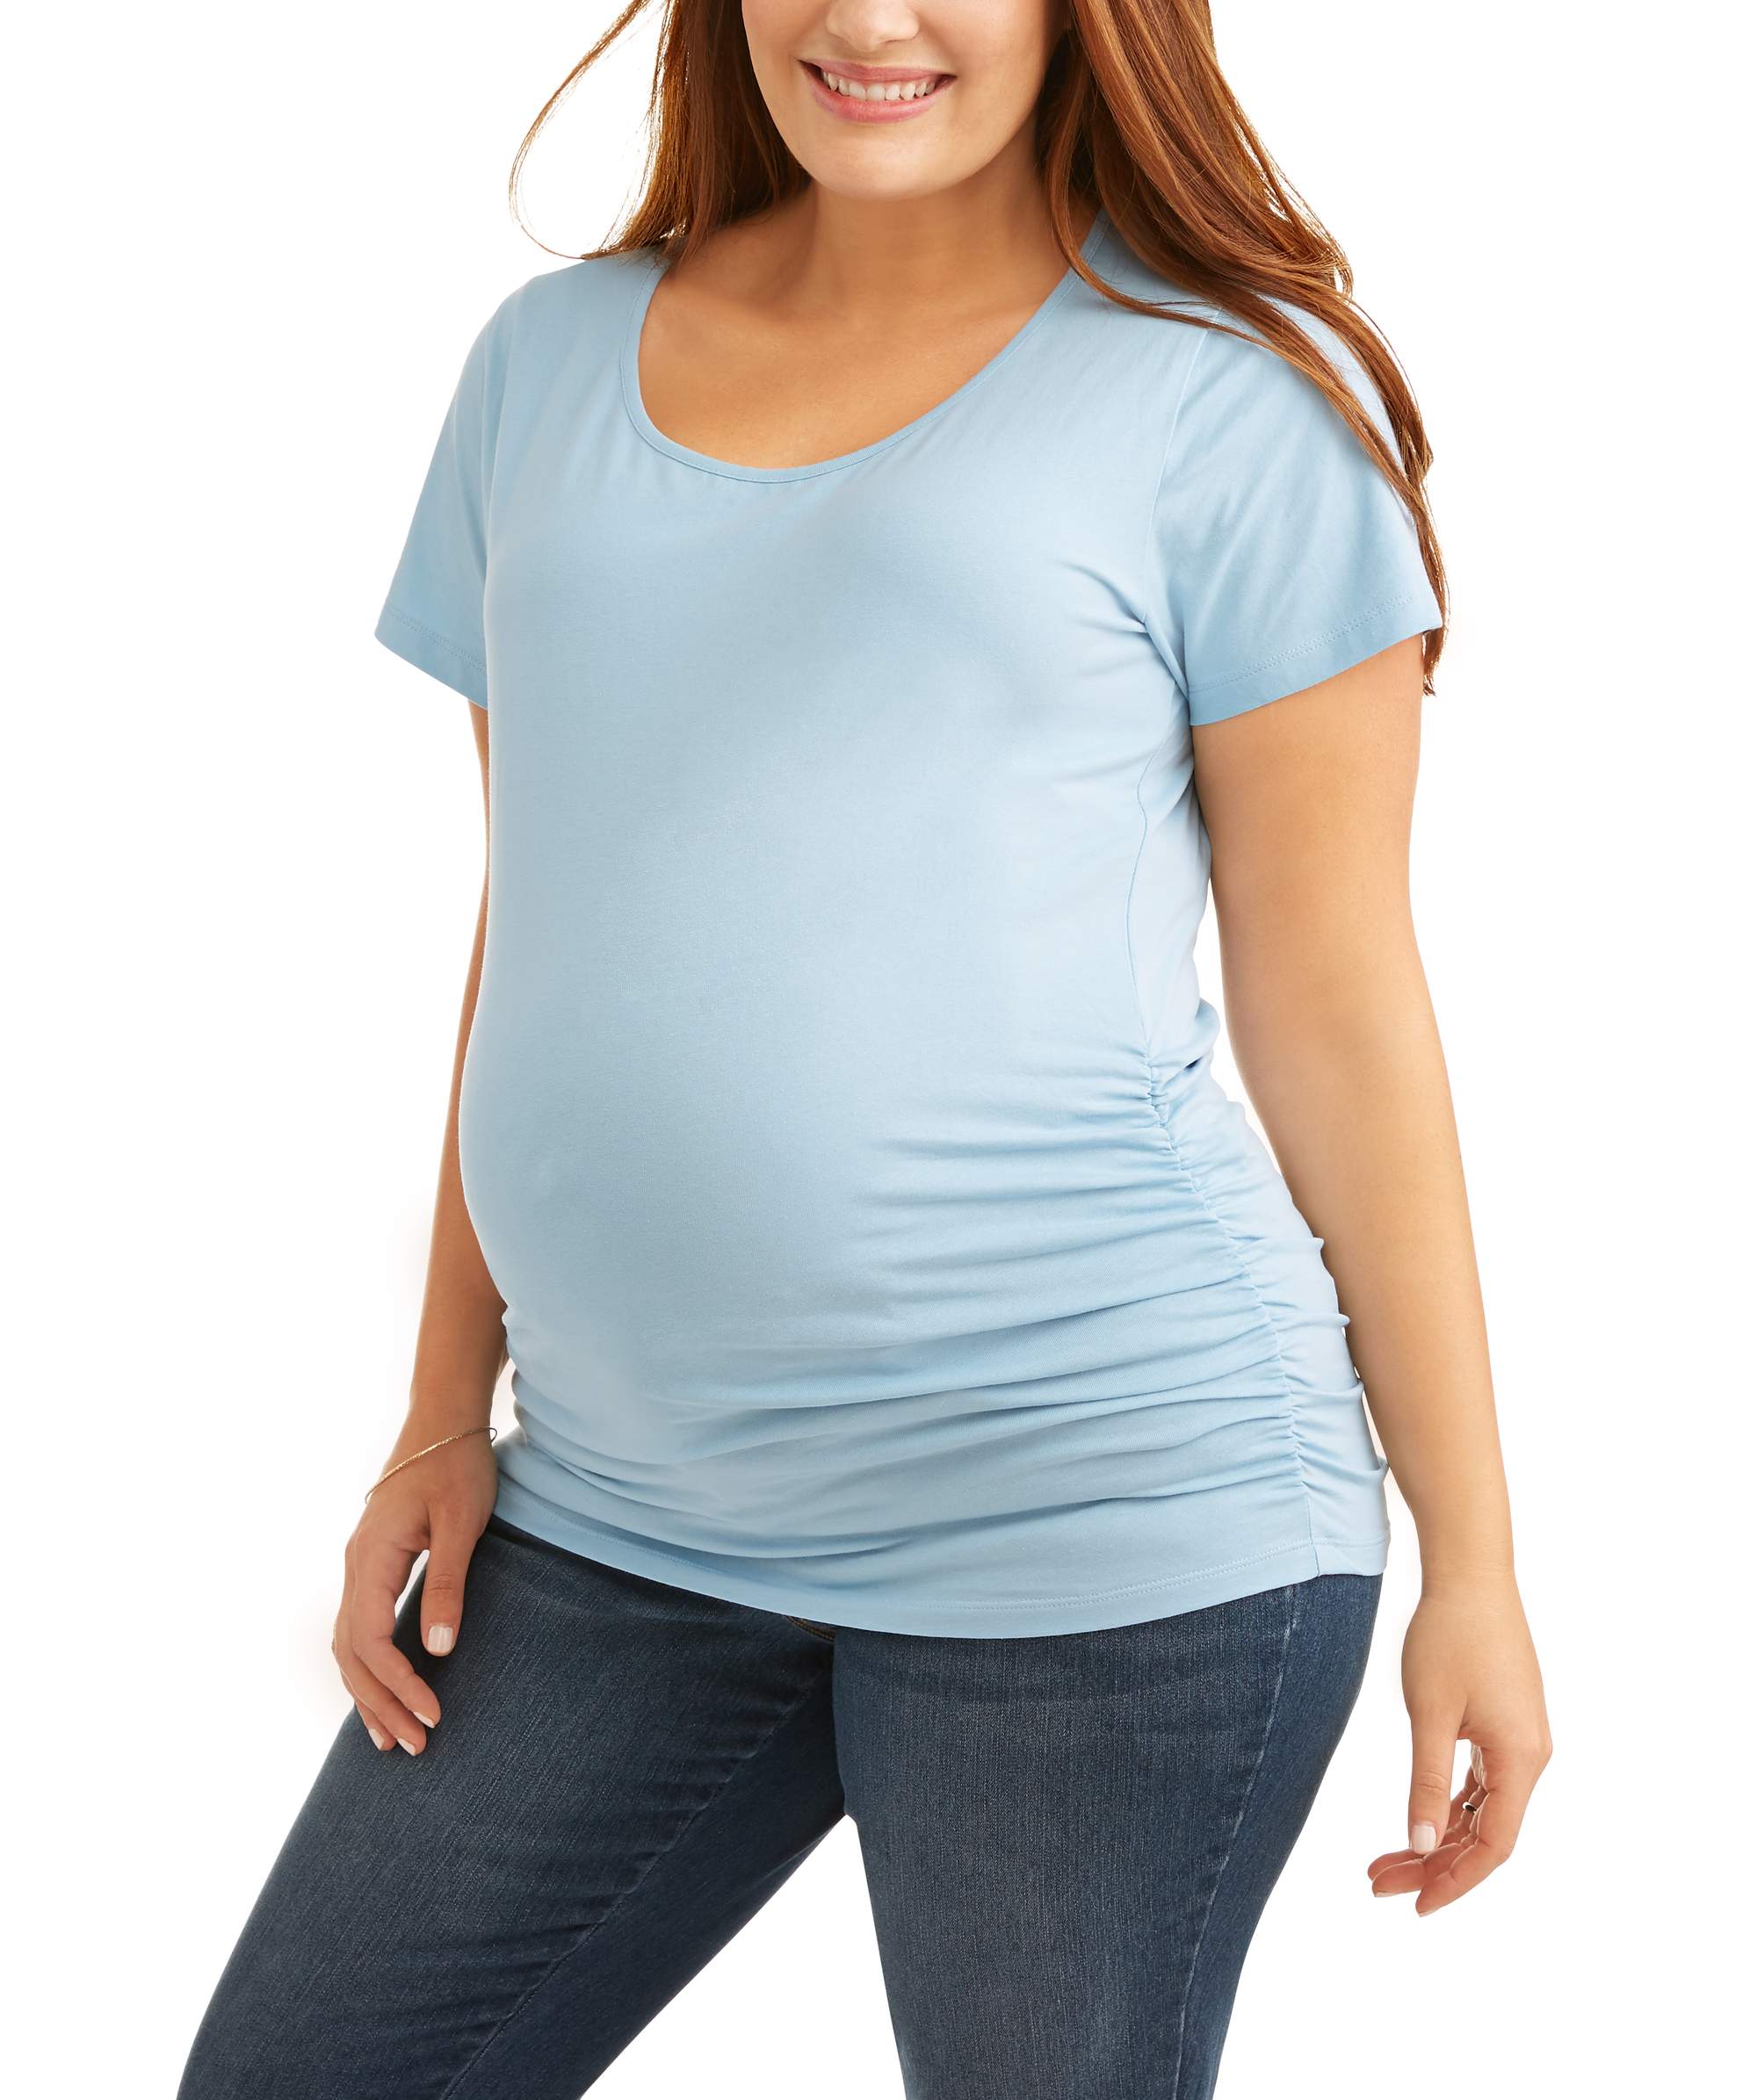 Maternity Short Sleeve Tee With Flattering Side Ruching--Available in Plus-Size - image 1 of 3